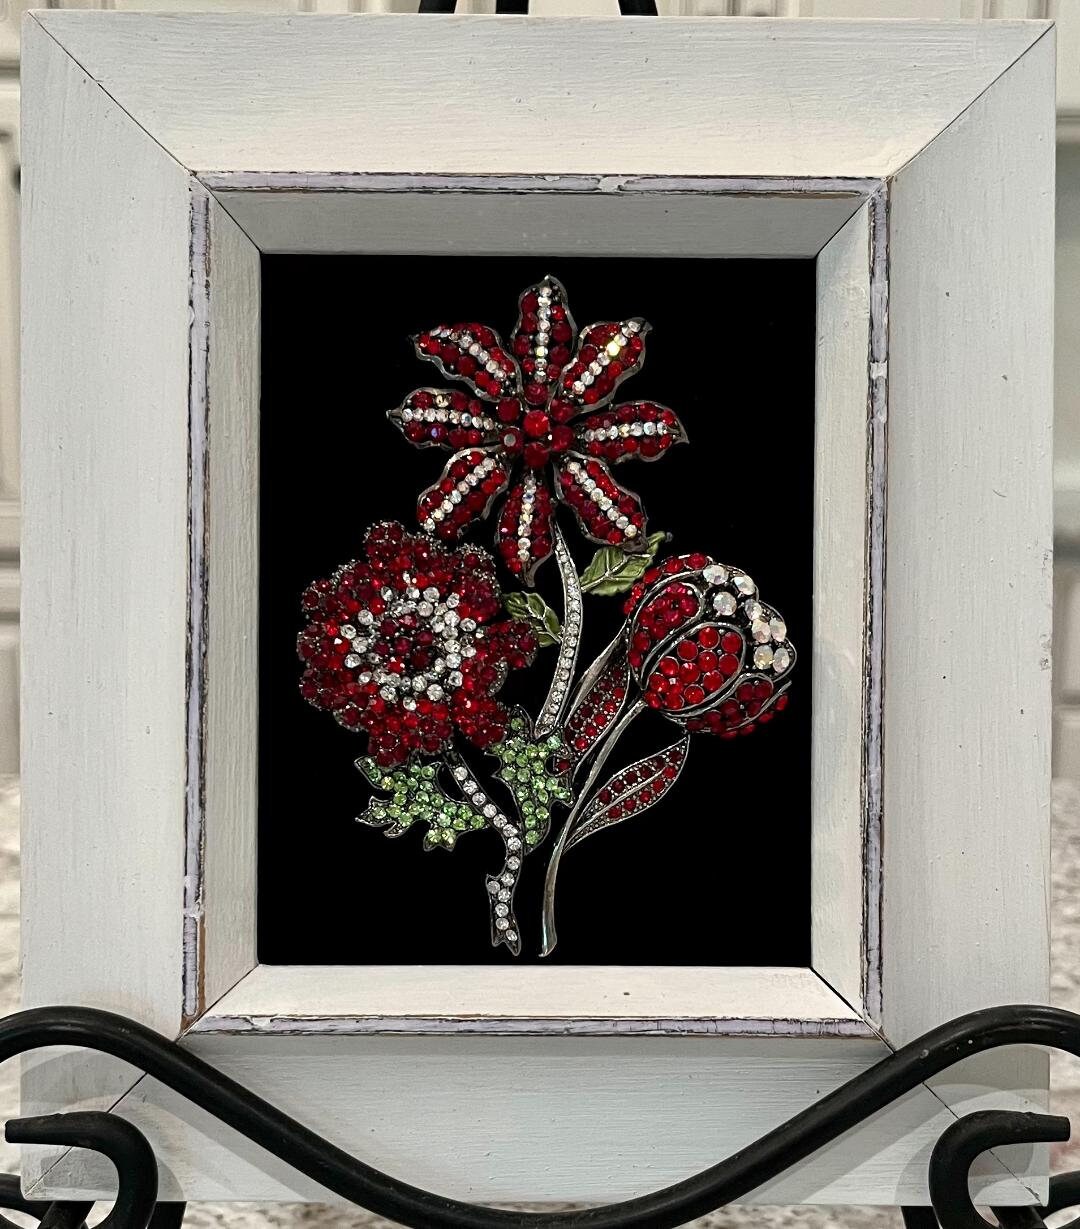 Folkart Flower Mosaic Kit. Suitable for Beginners. No Cutting. Craft Kit.  Crafty Gift. 